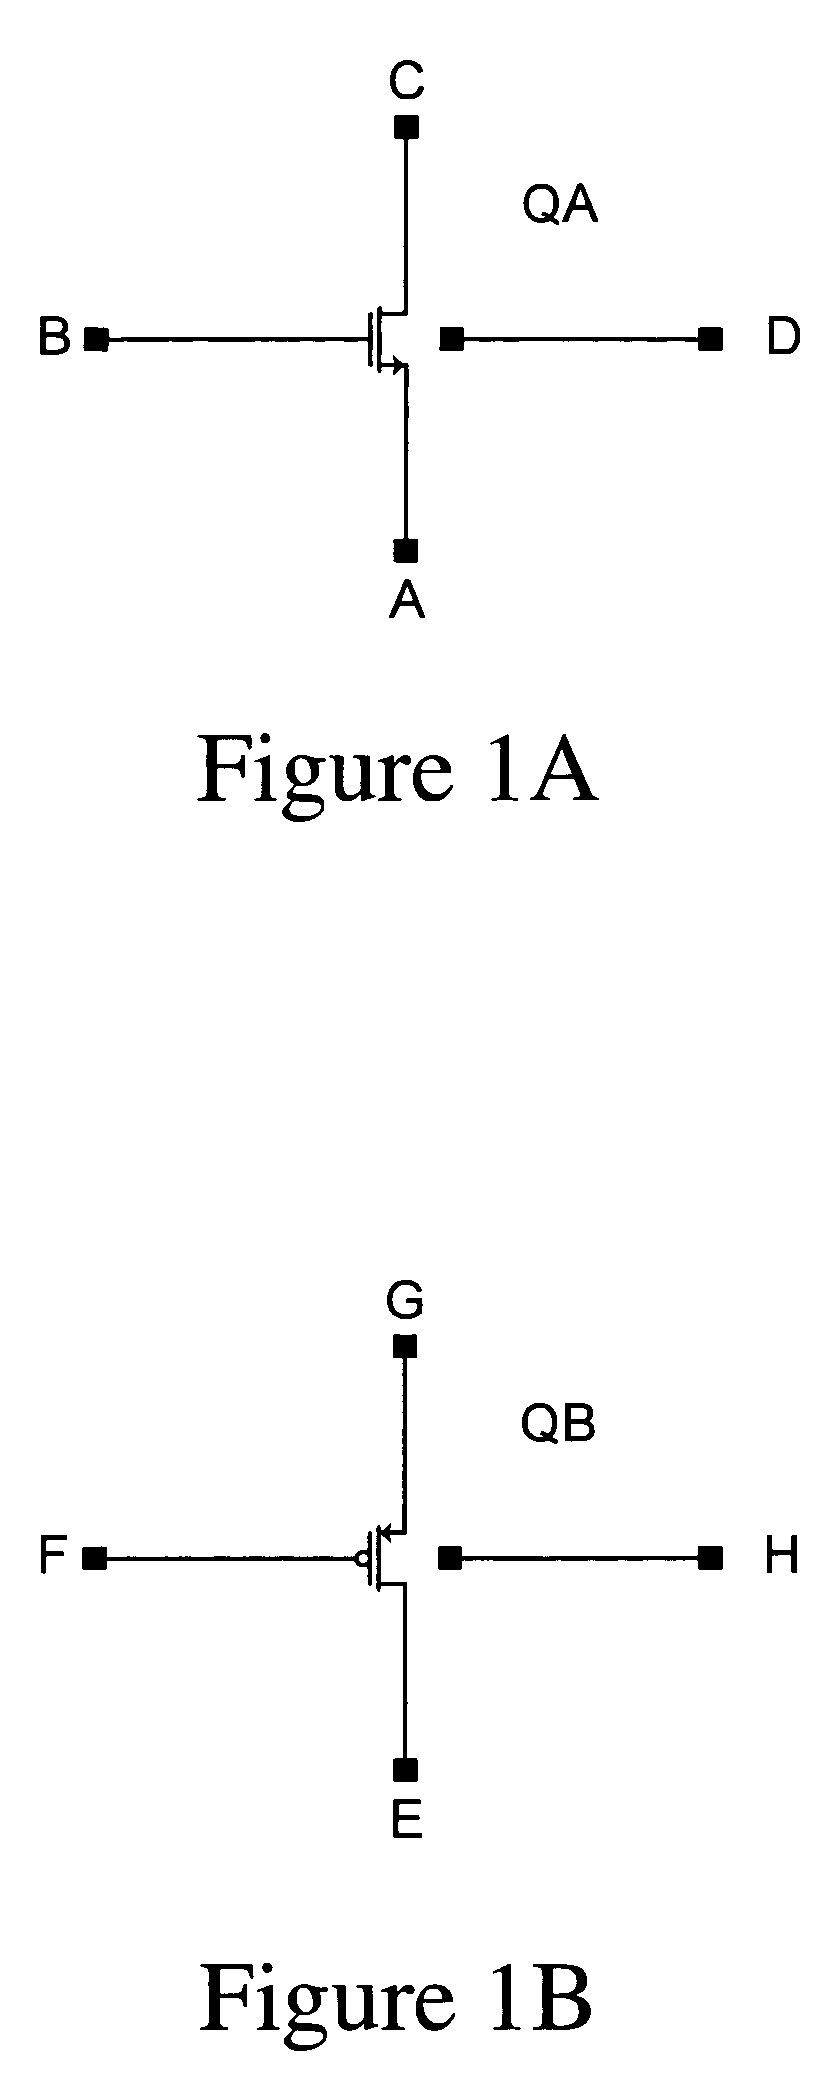 Output drive circuit that accommodates variable supply voltages